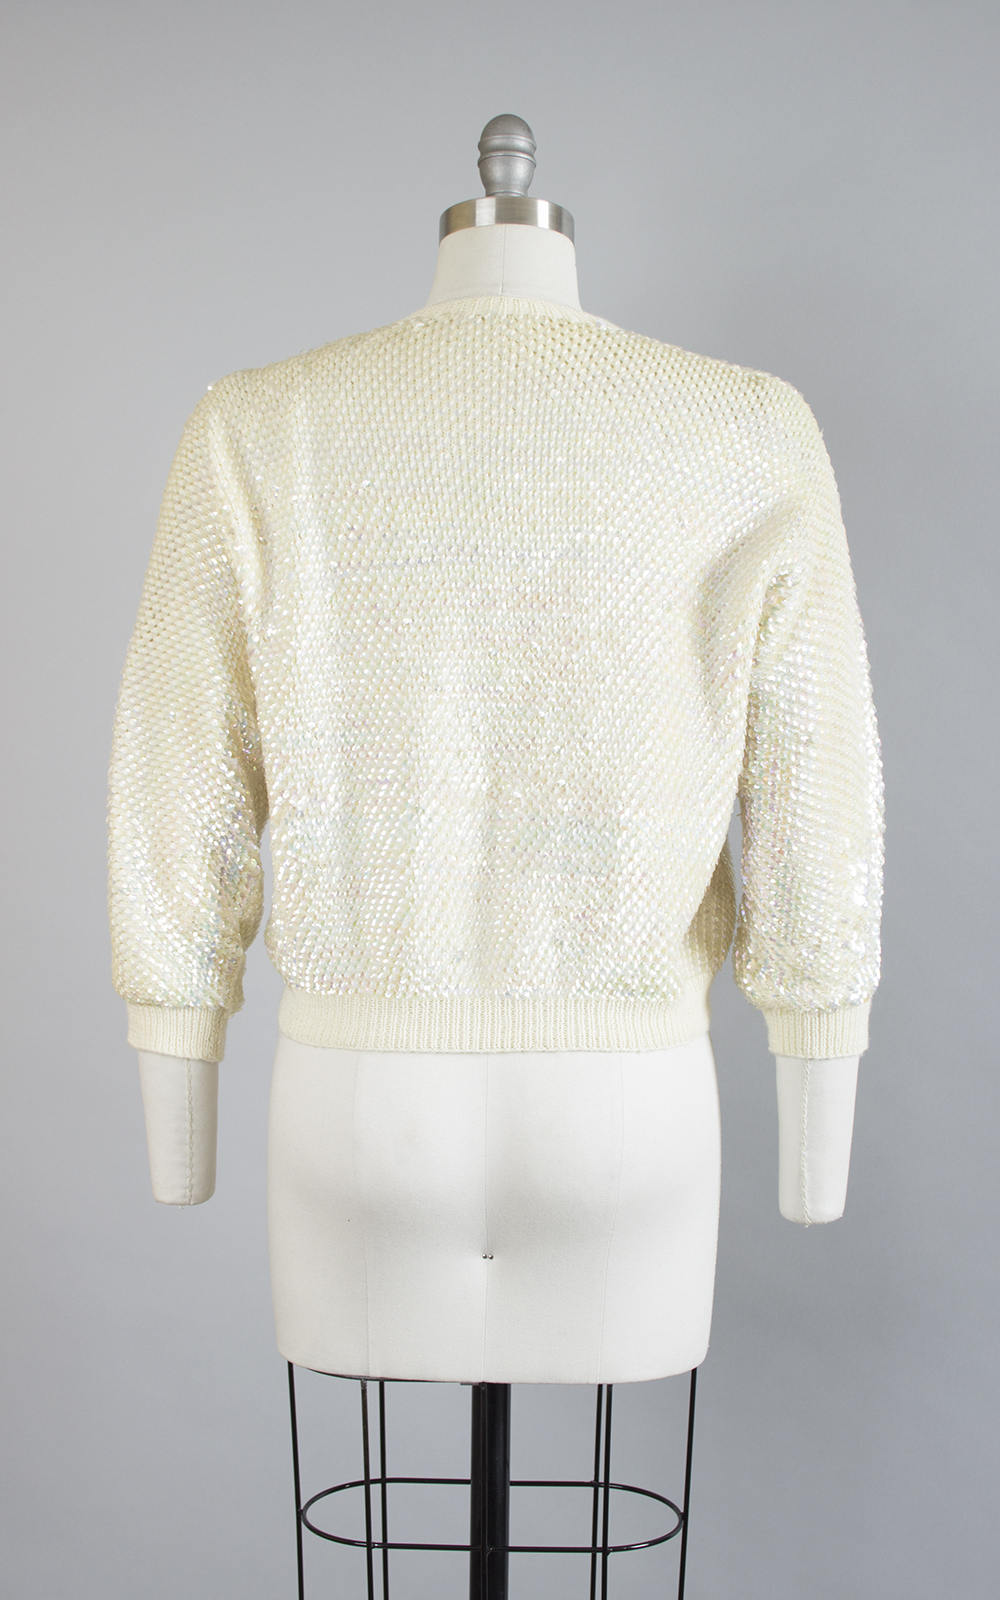 Vintage 1950s 1960s Cardigan | 50s 60s Fully Sequined Knit Wool Cream Cropped Sparkly Sequin Sweater Top (medium/large)